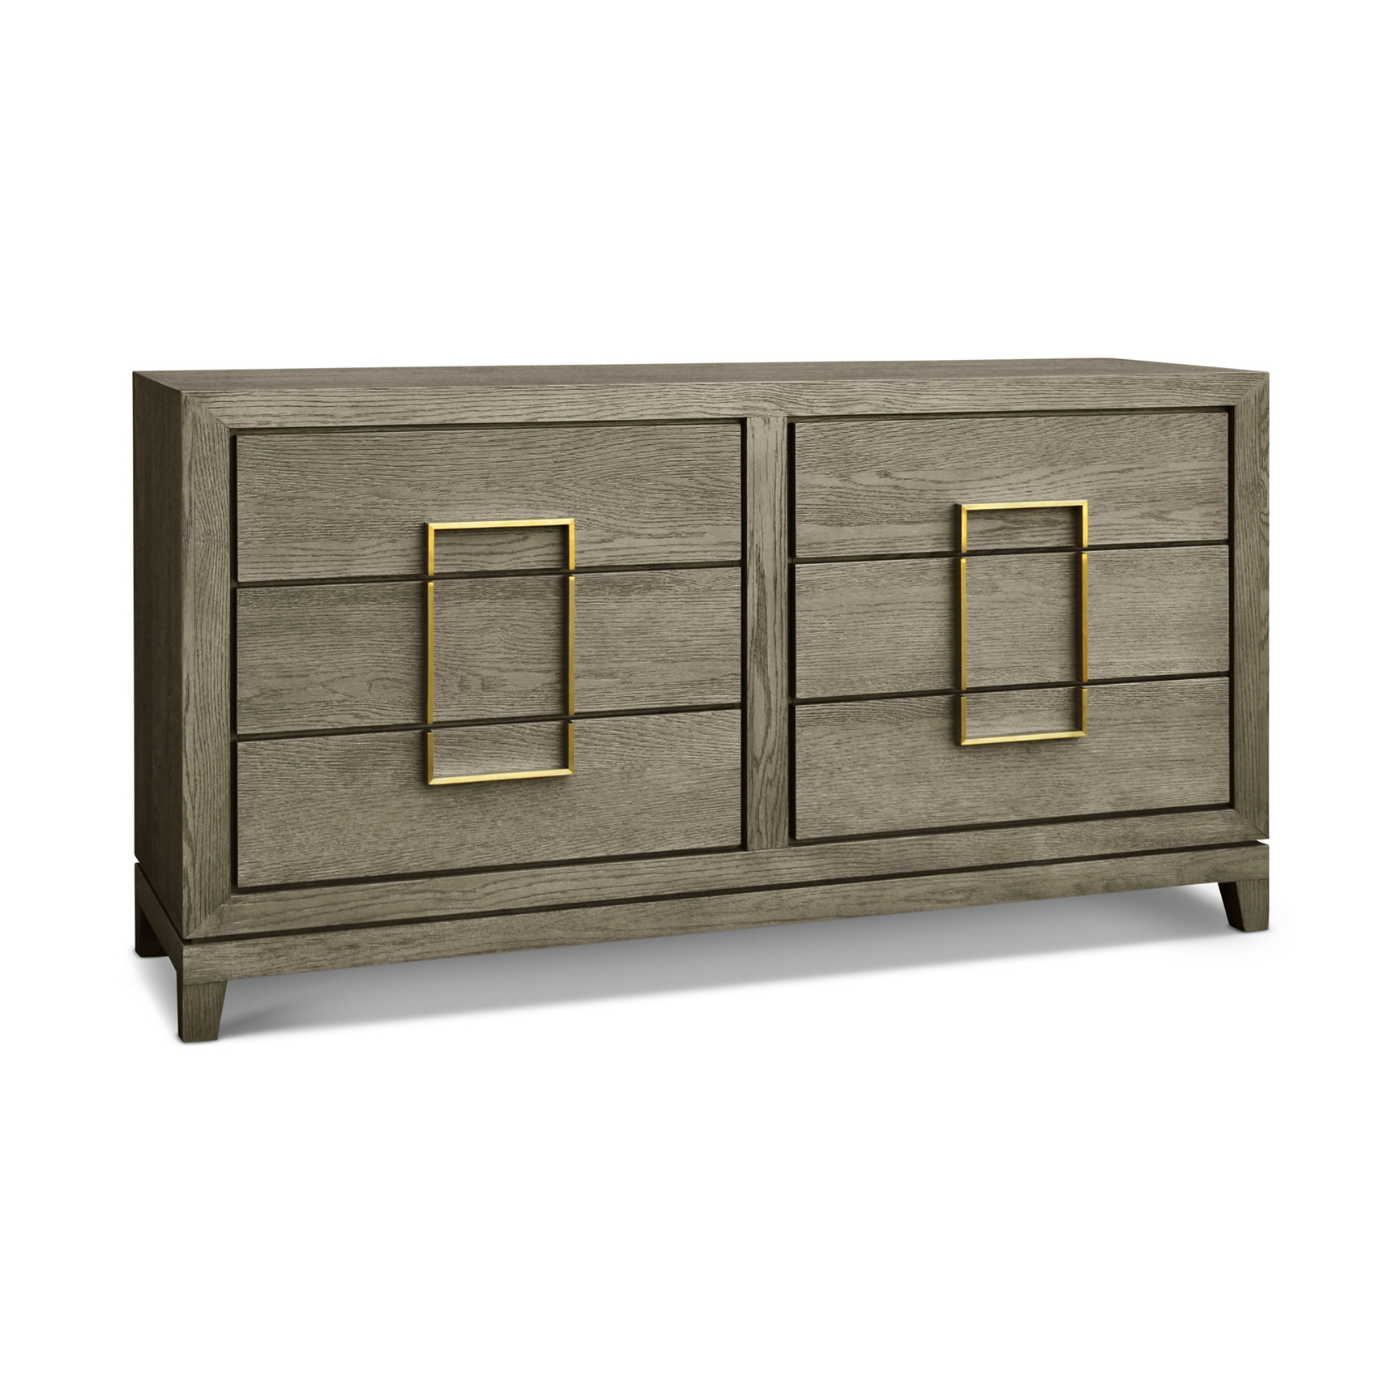 Lucca 6-Drawer Chest of Drawers Grey Coloured Oak Veneer With Gold Handles by Berkeley Designs - Maison Rêves UK